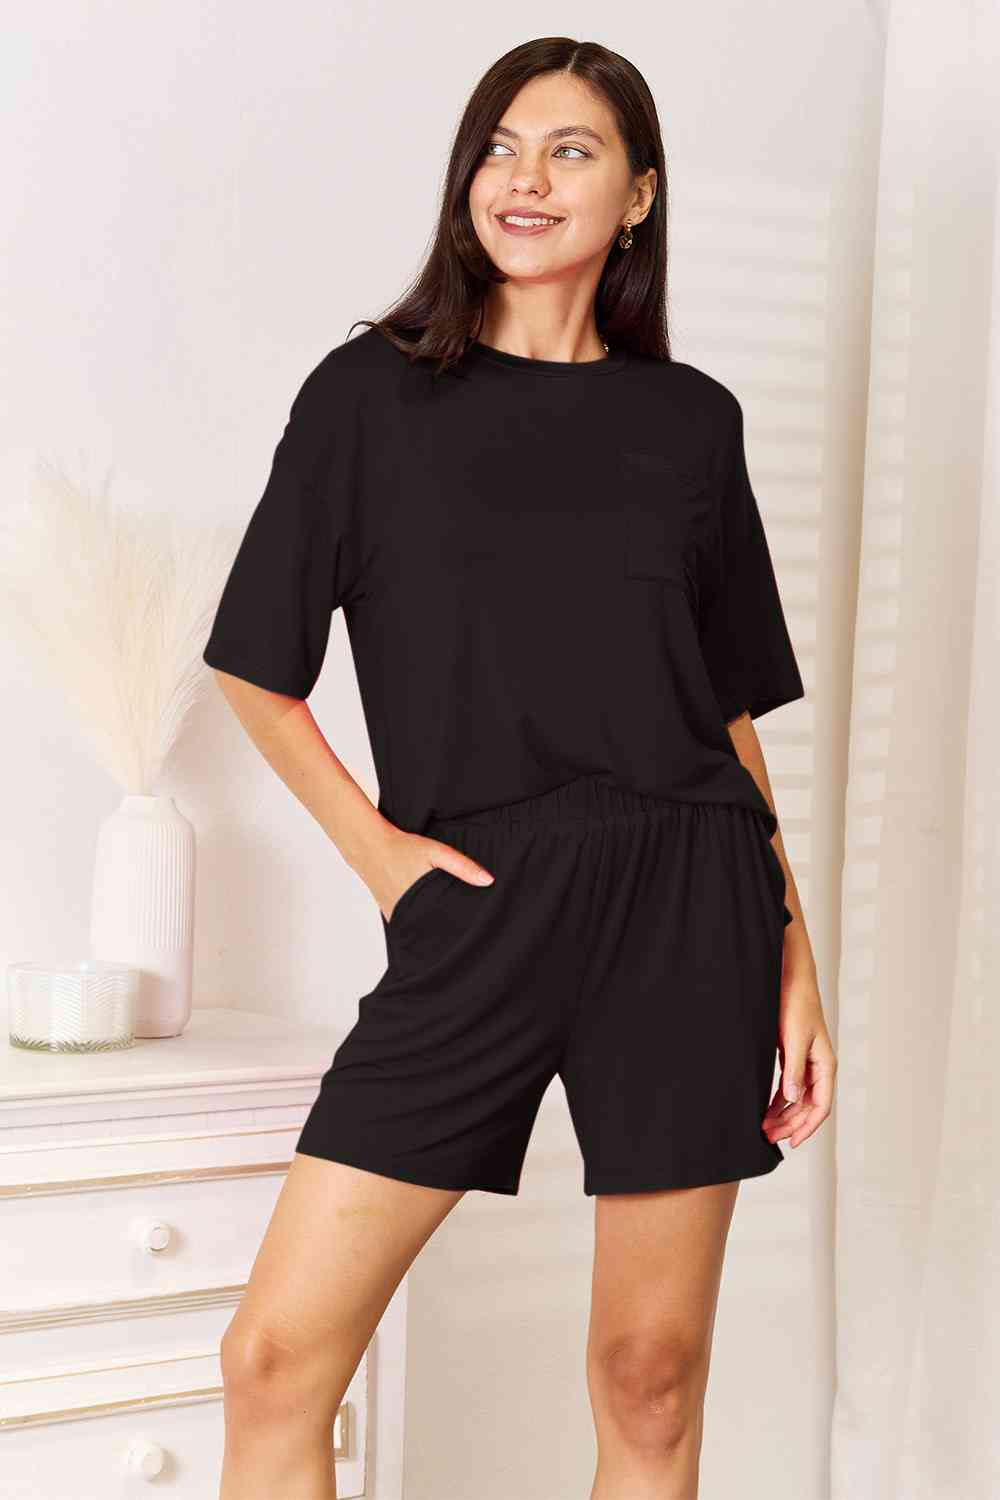 Women's Half Sleeve Oversized Top and Shorts Set with Pockets